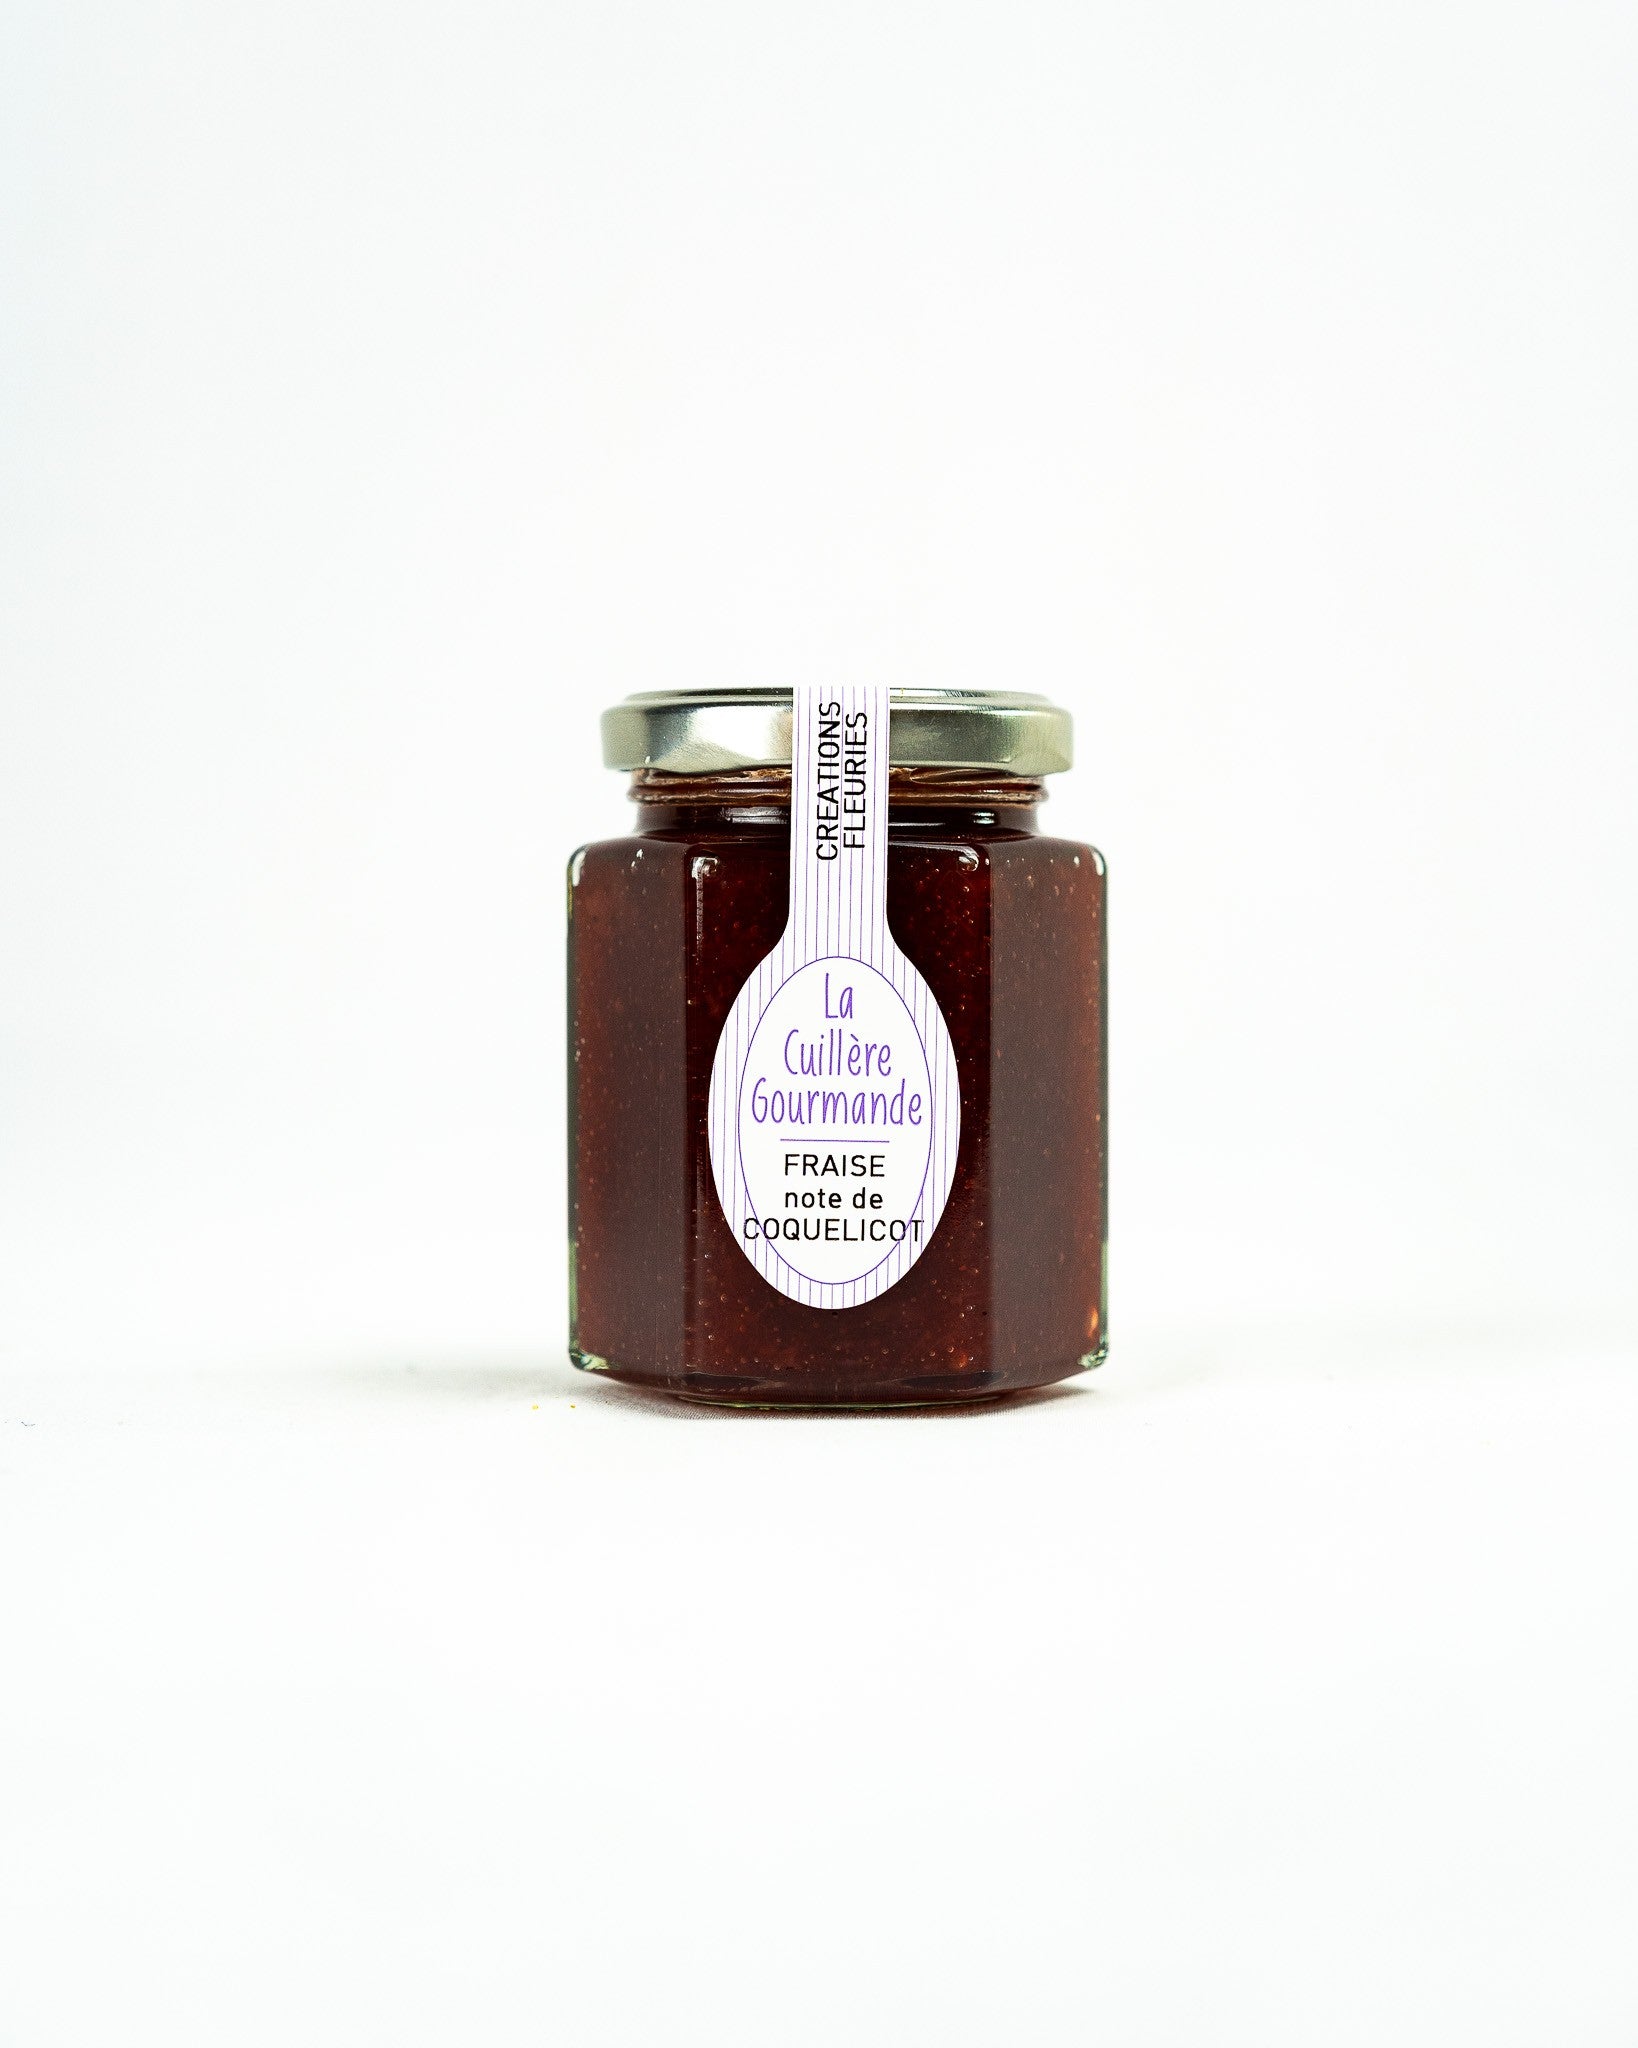 Strawberry jam and its poppy note